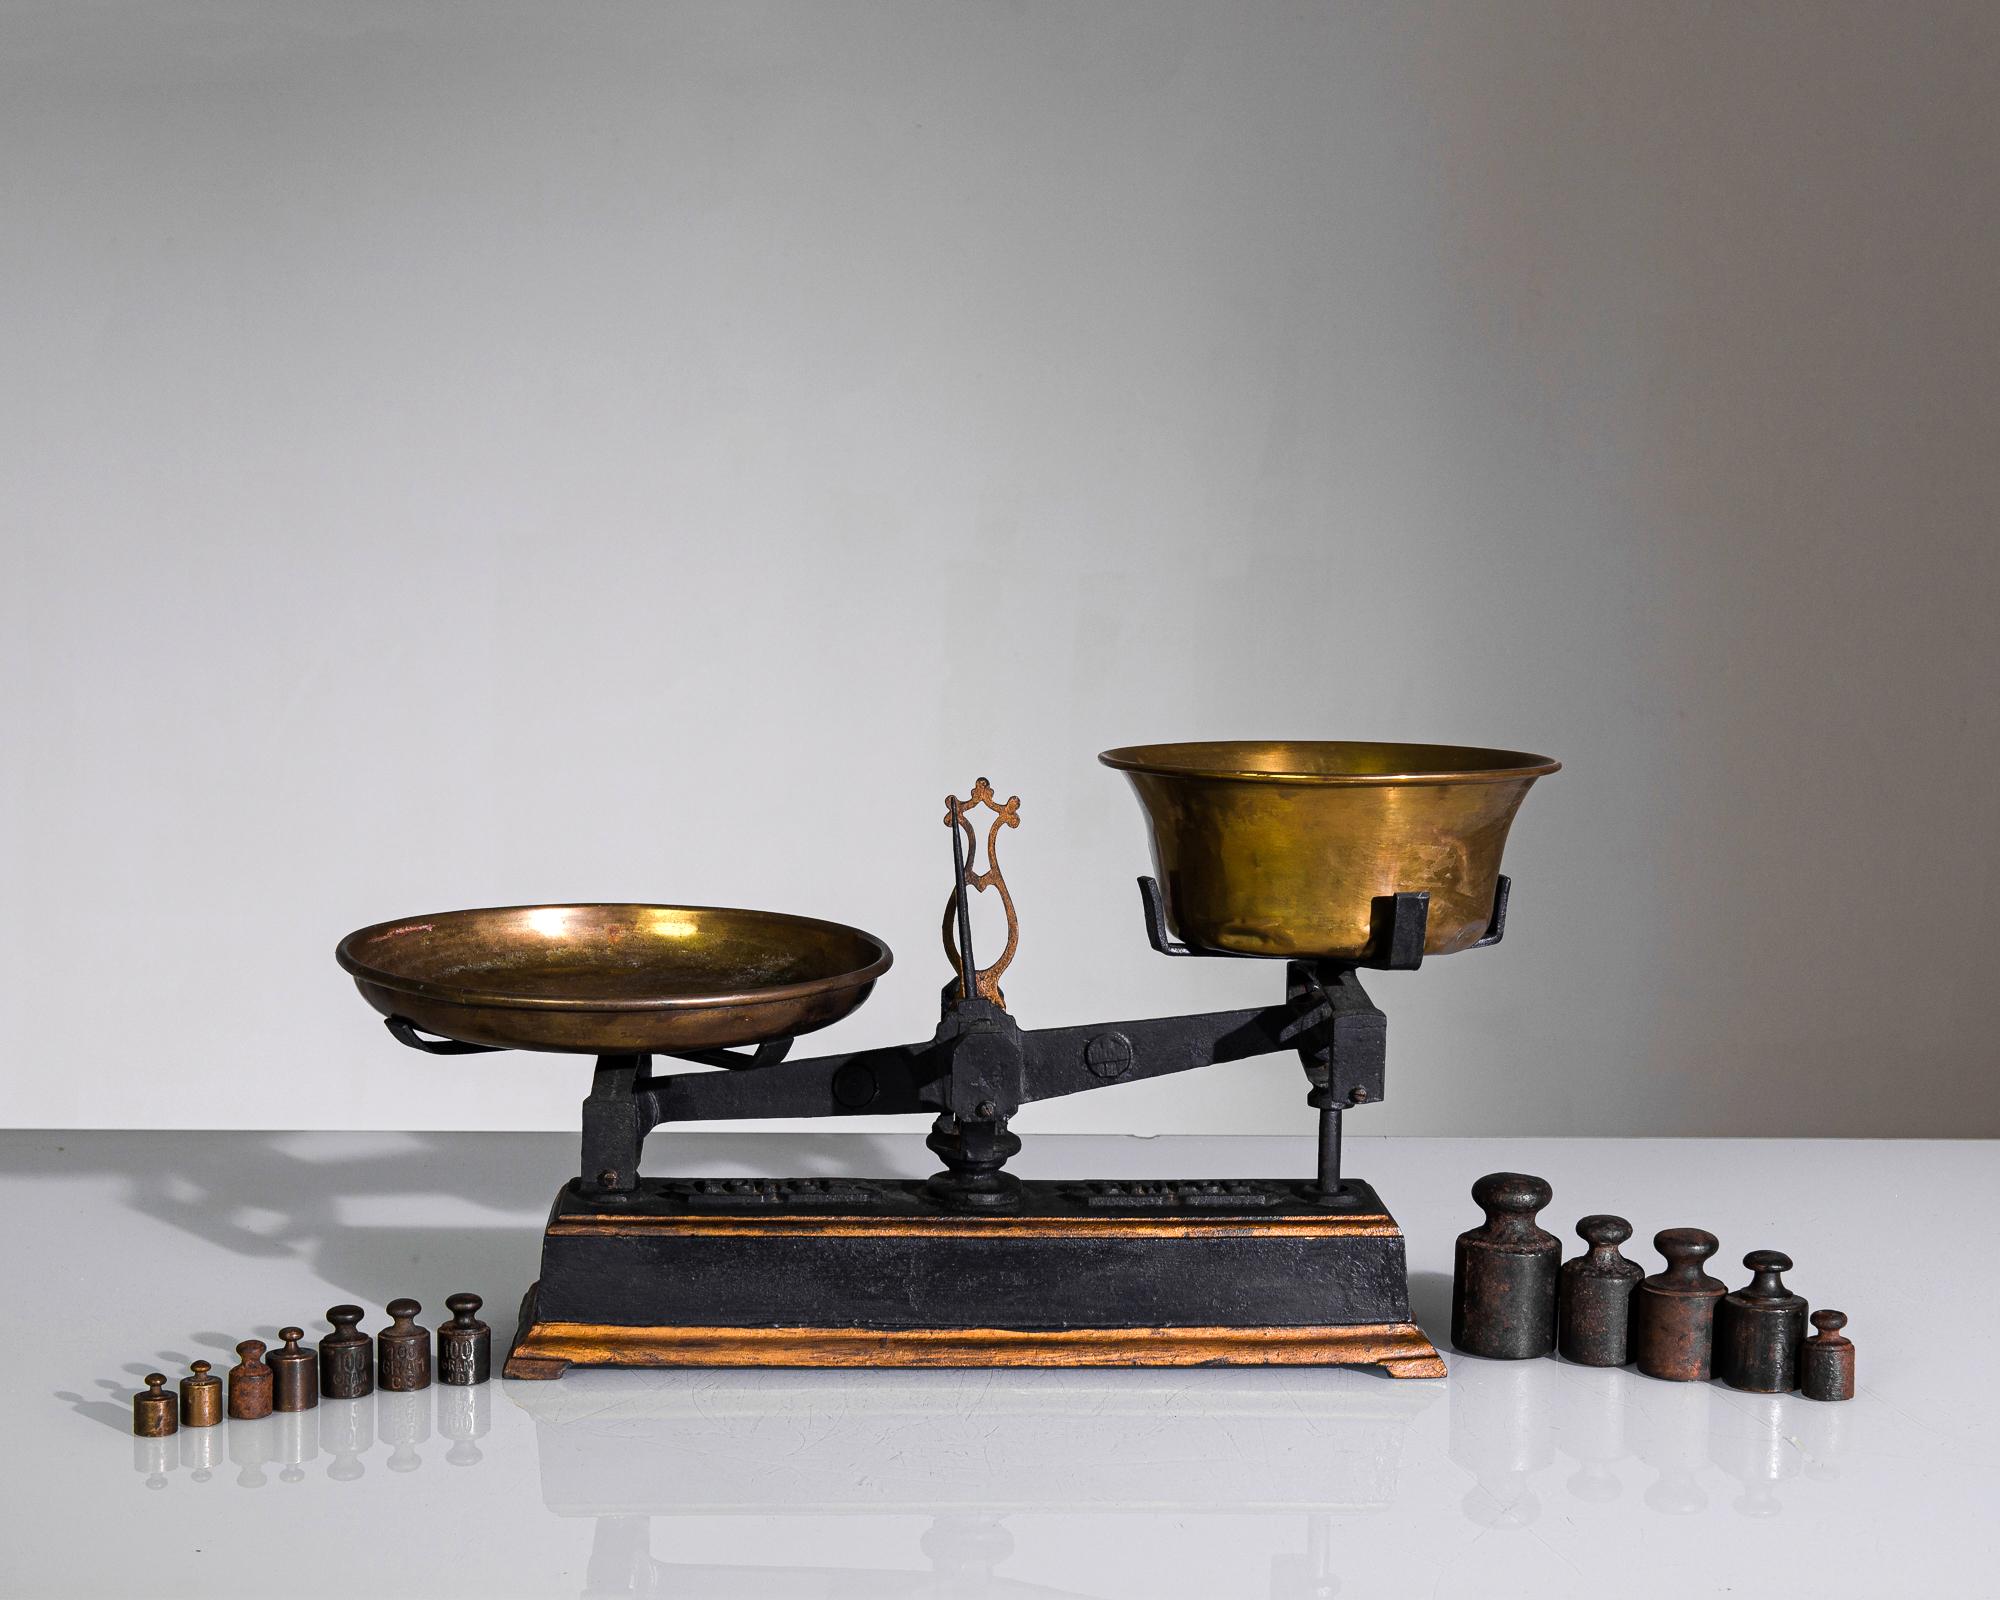 This antique collection of scales and weights was made in France. Scales of these dimensions were commonly used to weigh fruits and vegetables. The burnished brass plates are set on a cast iron base with a complementary black and amber finish.